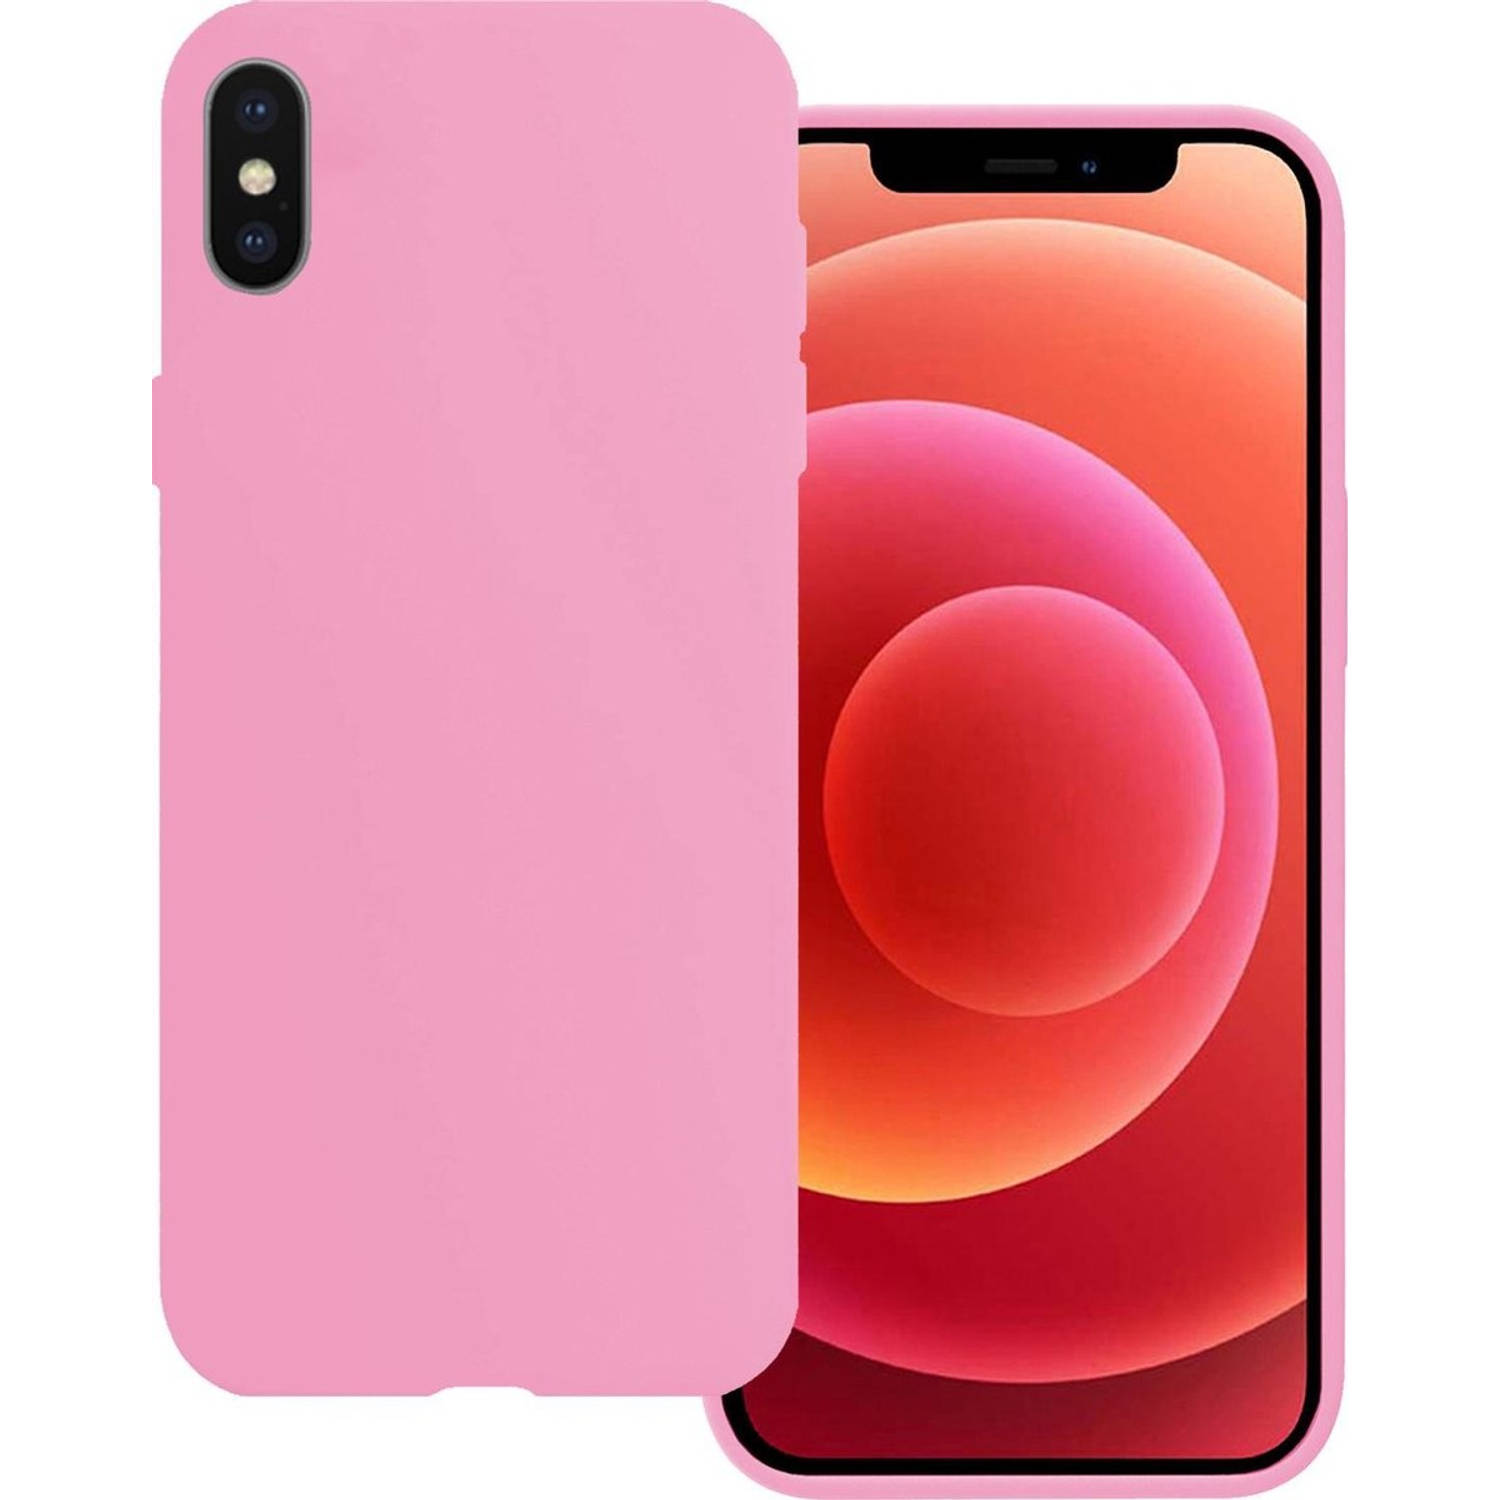 Basey Hoes Voor Iphone Xs Hoesje Siliconen Case Back Cover Hoes Voor Iphone Xs Hoesje Siliconen Hoes